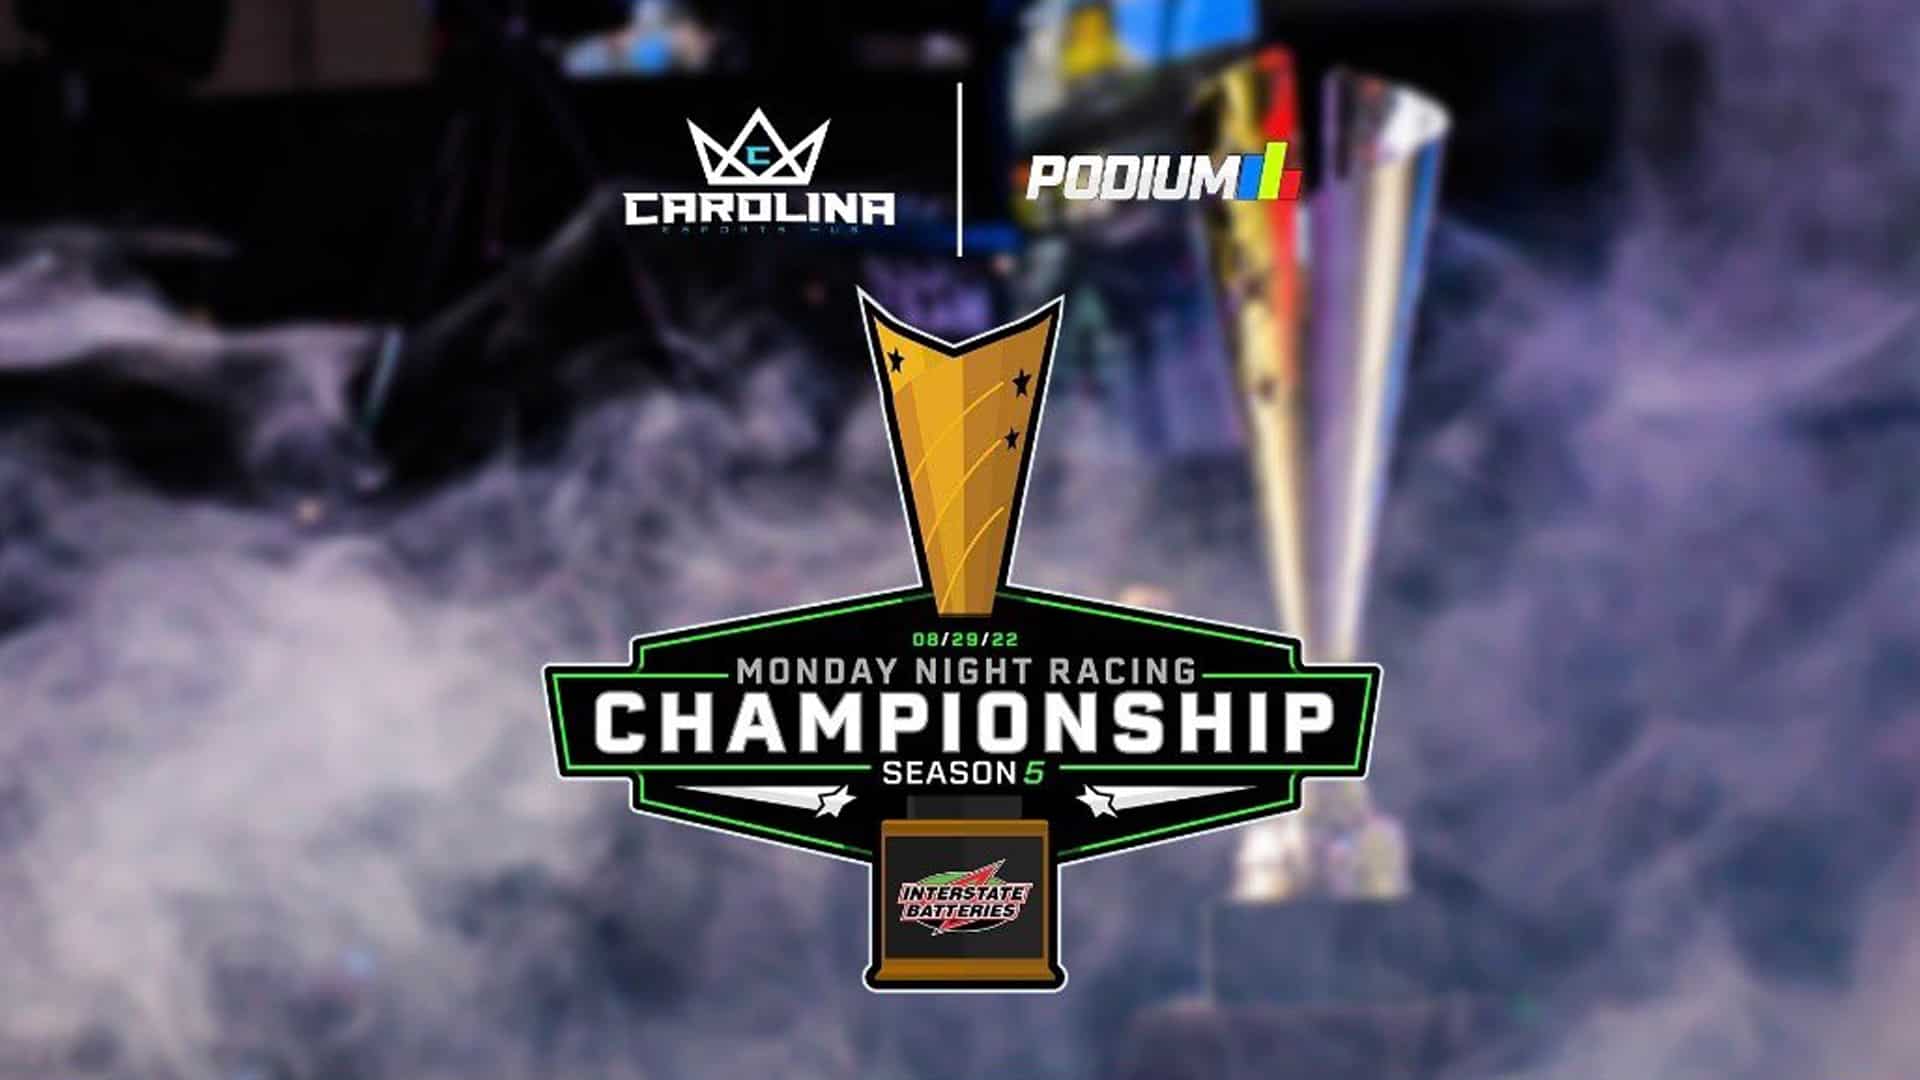 Monday Night Racing’s Season 5 finale will be live at the Carolina Esports Hub on 29th August